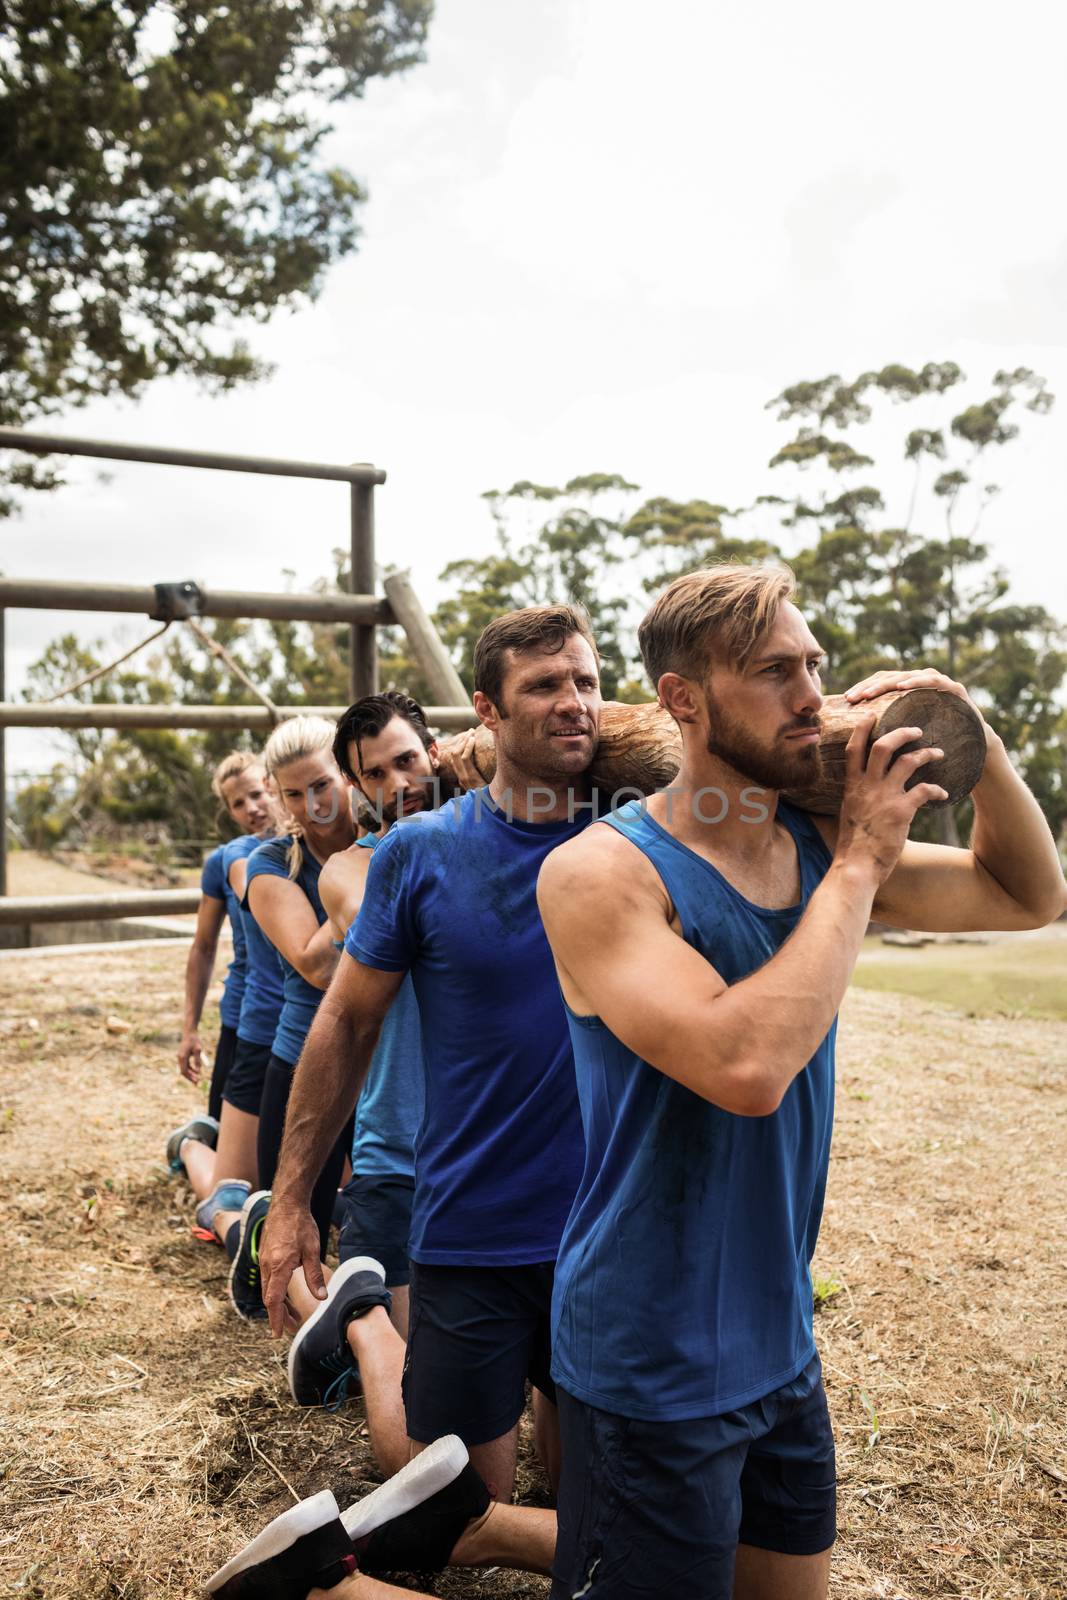 Fit people holding a heavy wooden log during boot camp training